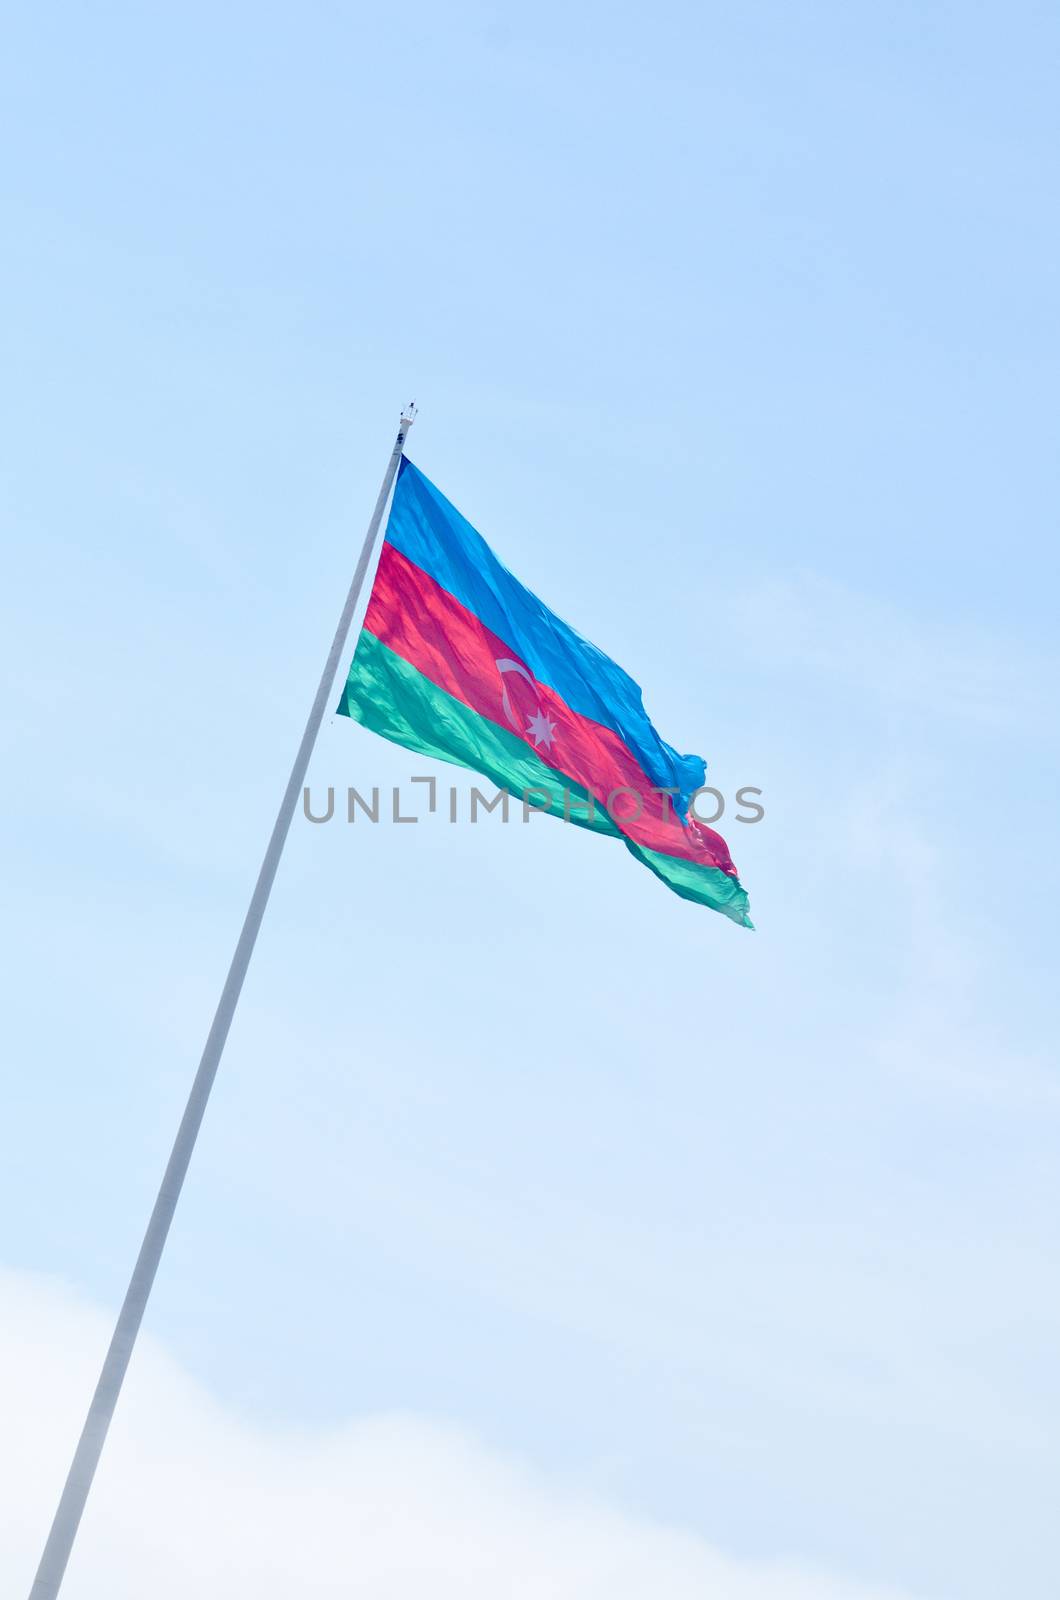 The flag was approved on November 9,1918 as the national flag of the Azerbaijan Democratic Republic,which existed until 1920.On February 5,1991,the flag was approved as the national flag of the Republic of Azerbaijan,which proclaimed its independence in the same year.